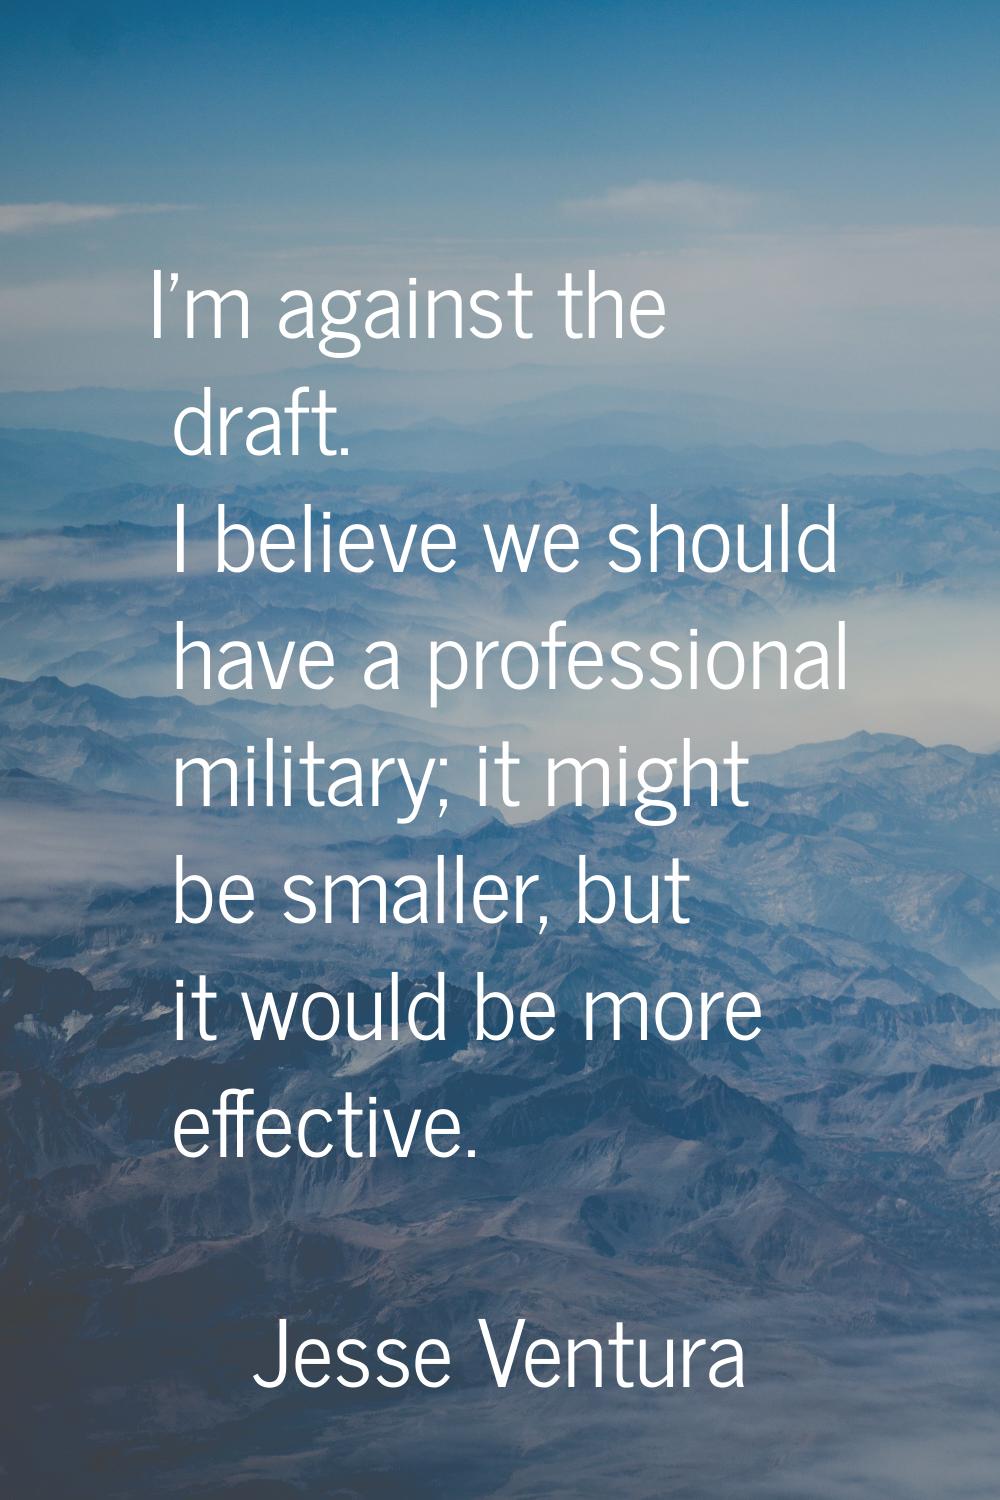 I'm against the draft. I believe we should have a professional military; it might be smaller, but i